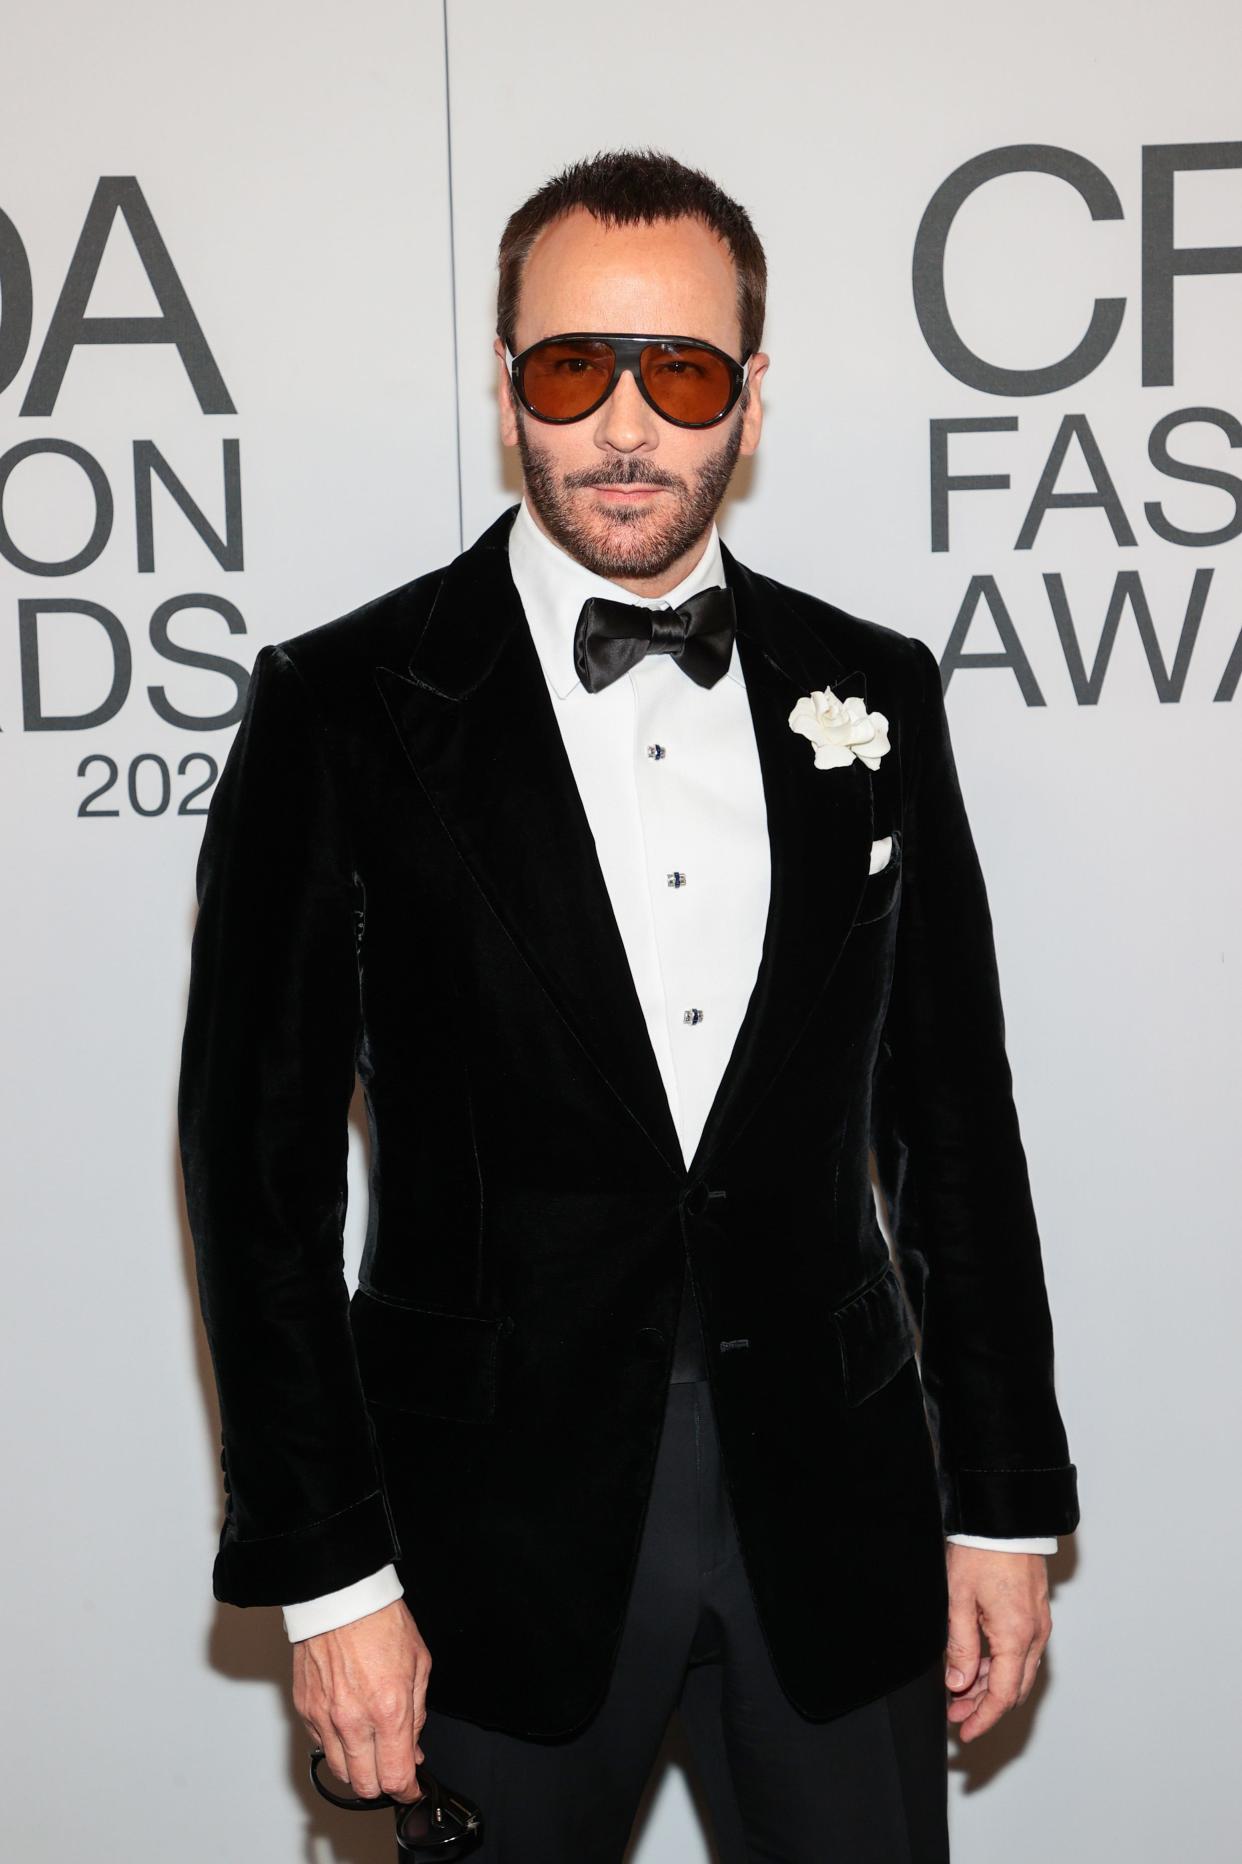 Designer Tom Ford, seen here at the 2021 Council of Fashion Designers of America Awards in New York City, in December used a trust to by, for a recorded $51 million, an estate on Jungle Road in Palm Beach.